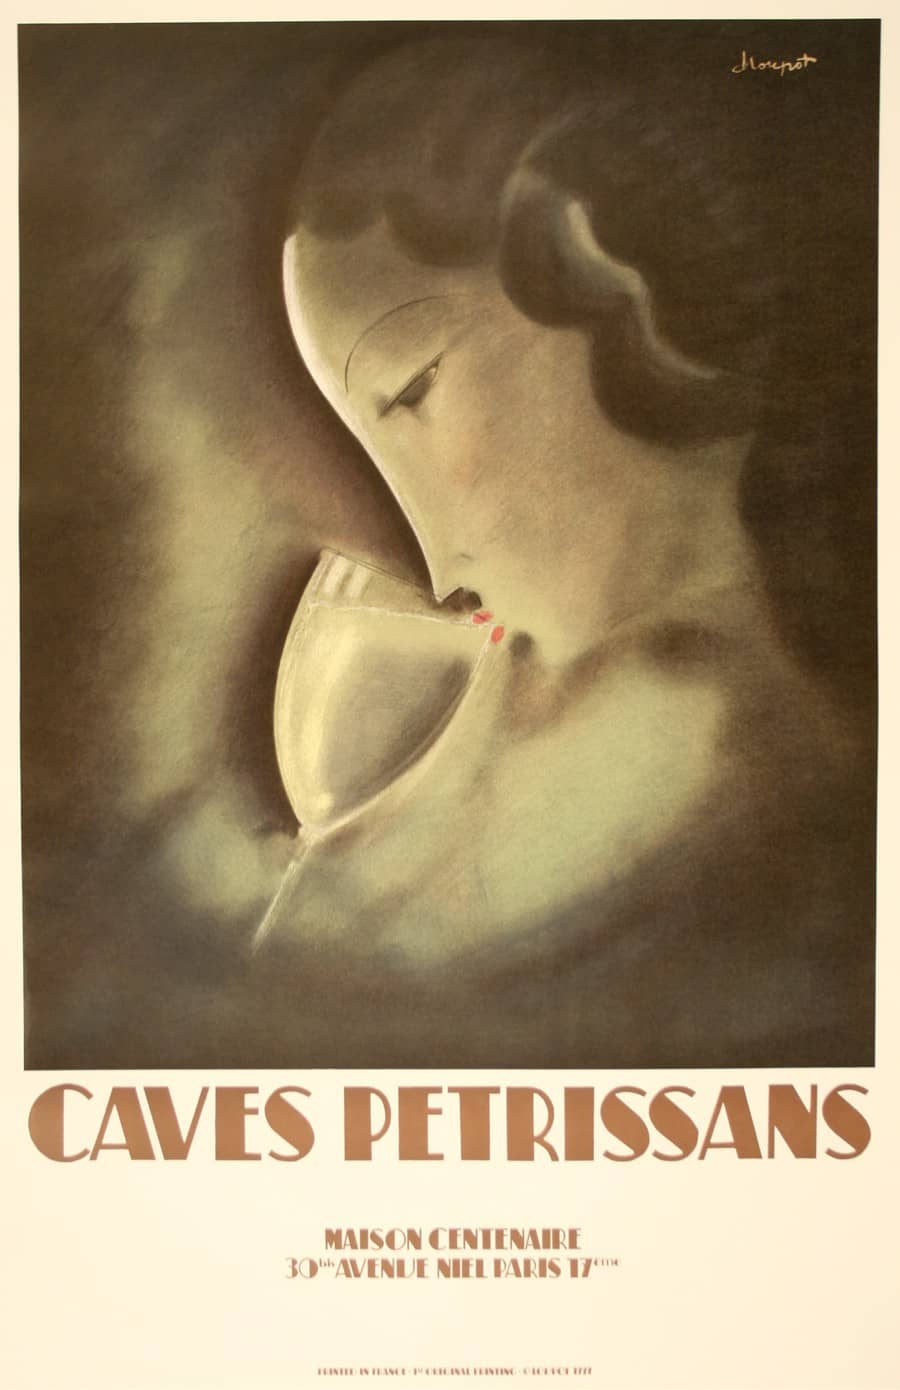 Caves Petrissans Original French Poster by Charles Loupot c1990